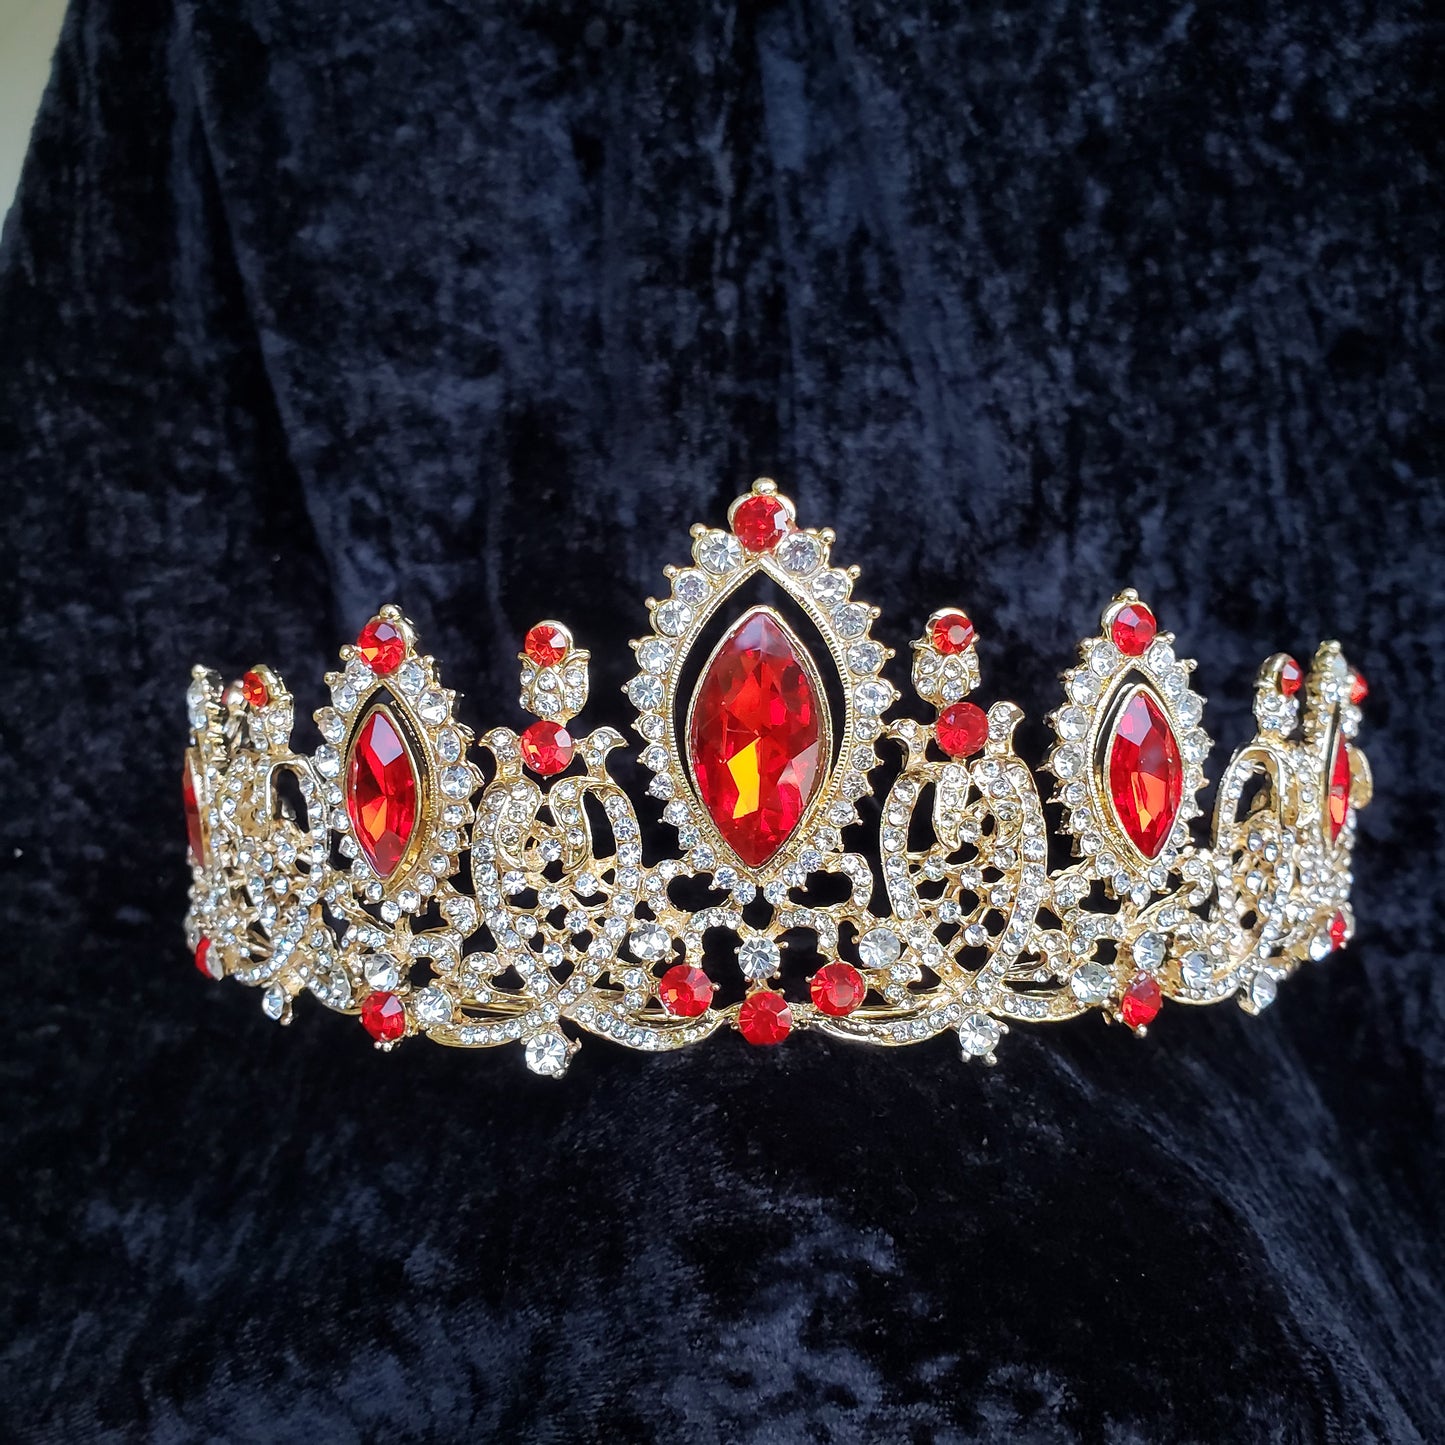 Red Ruby Crown Tiara Queen of hearts Gold headress jewelry bridal Halloween cosplay Wedding pageant royalty